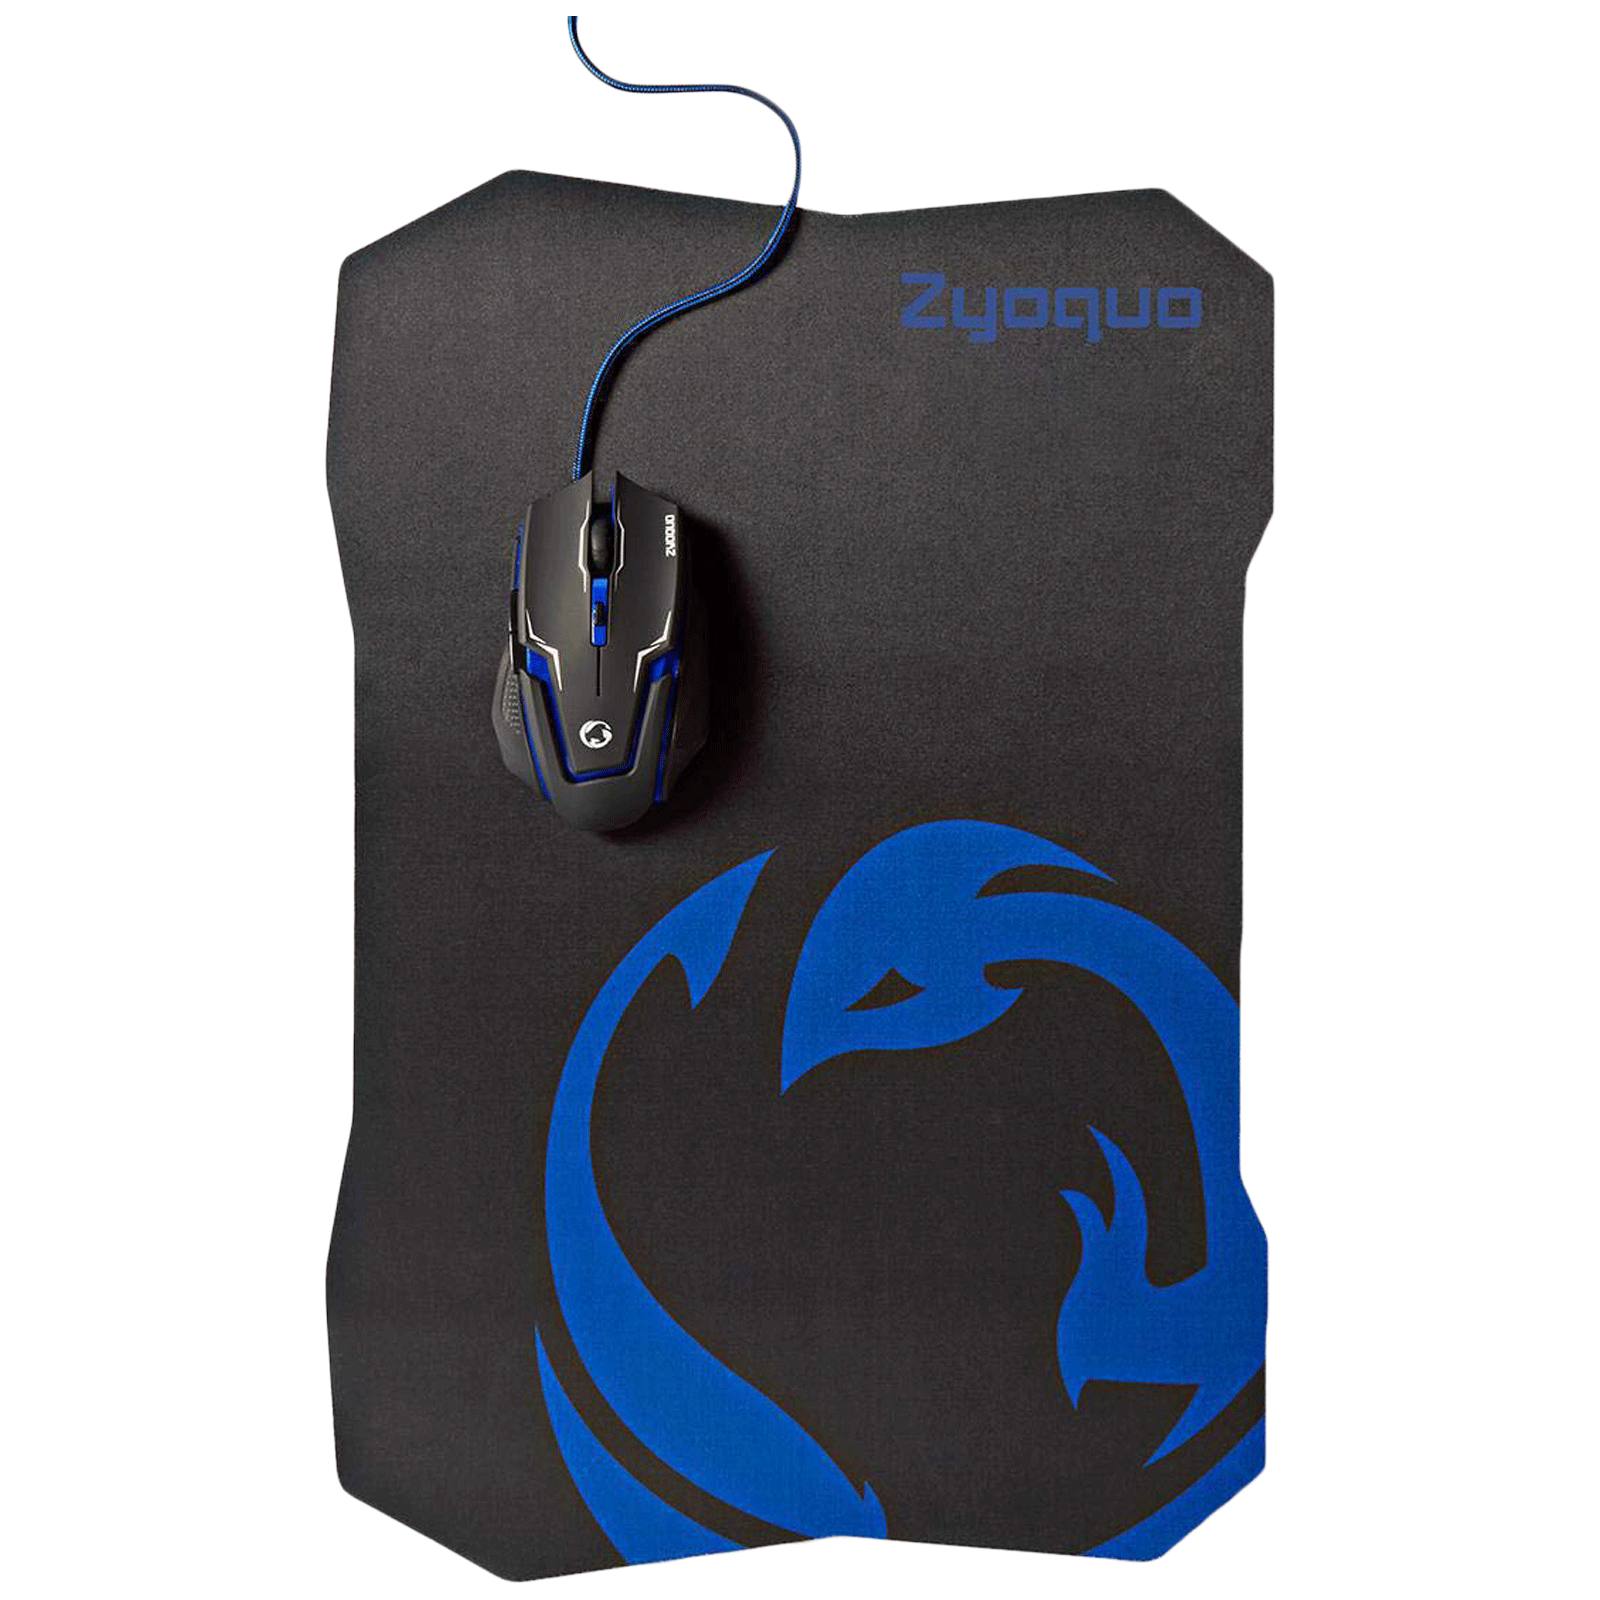 Nedis Wired Optical Gaming Mouse and Mouse Pad (Adjustable DPI, GMMP200BK, Black)_1